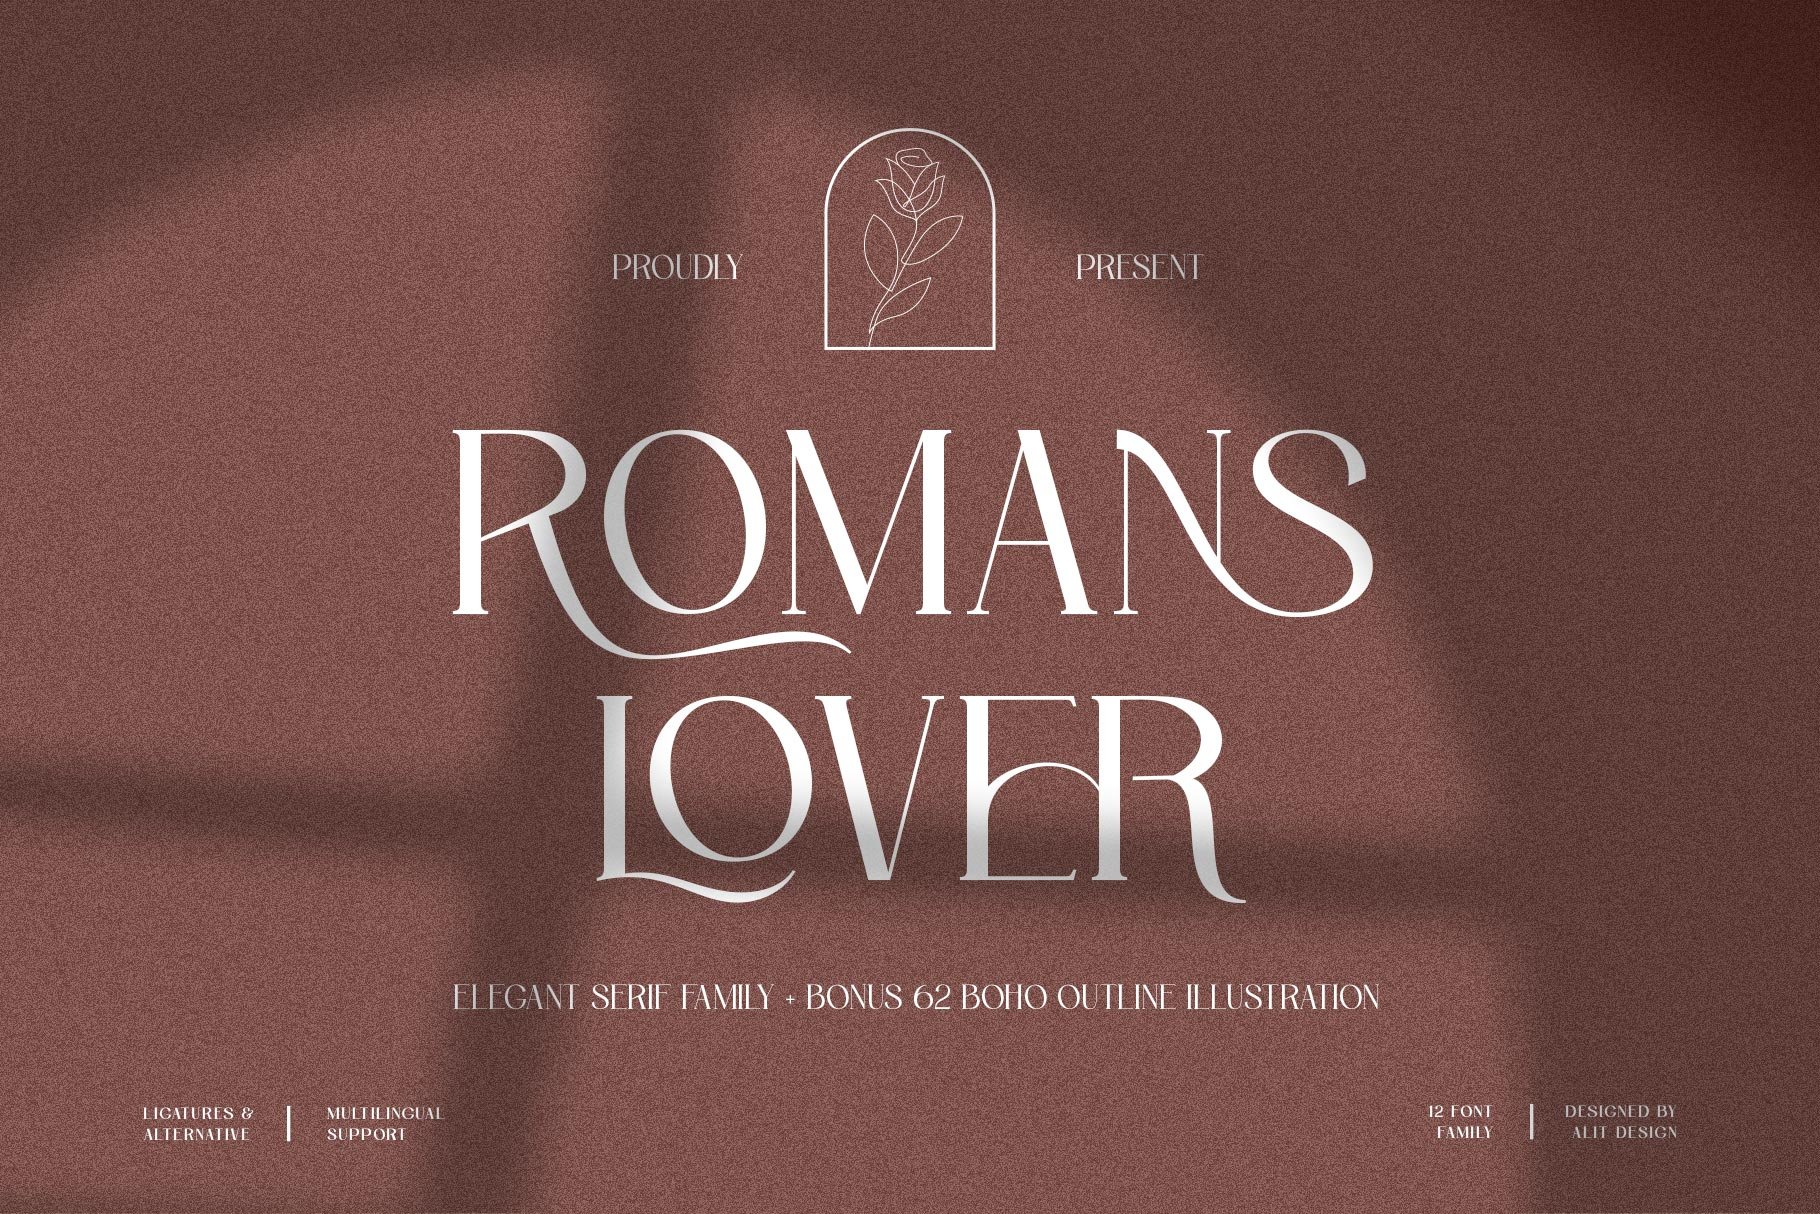 Roman Lover cover image.